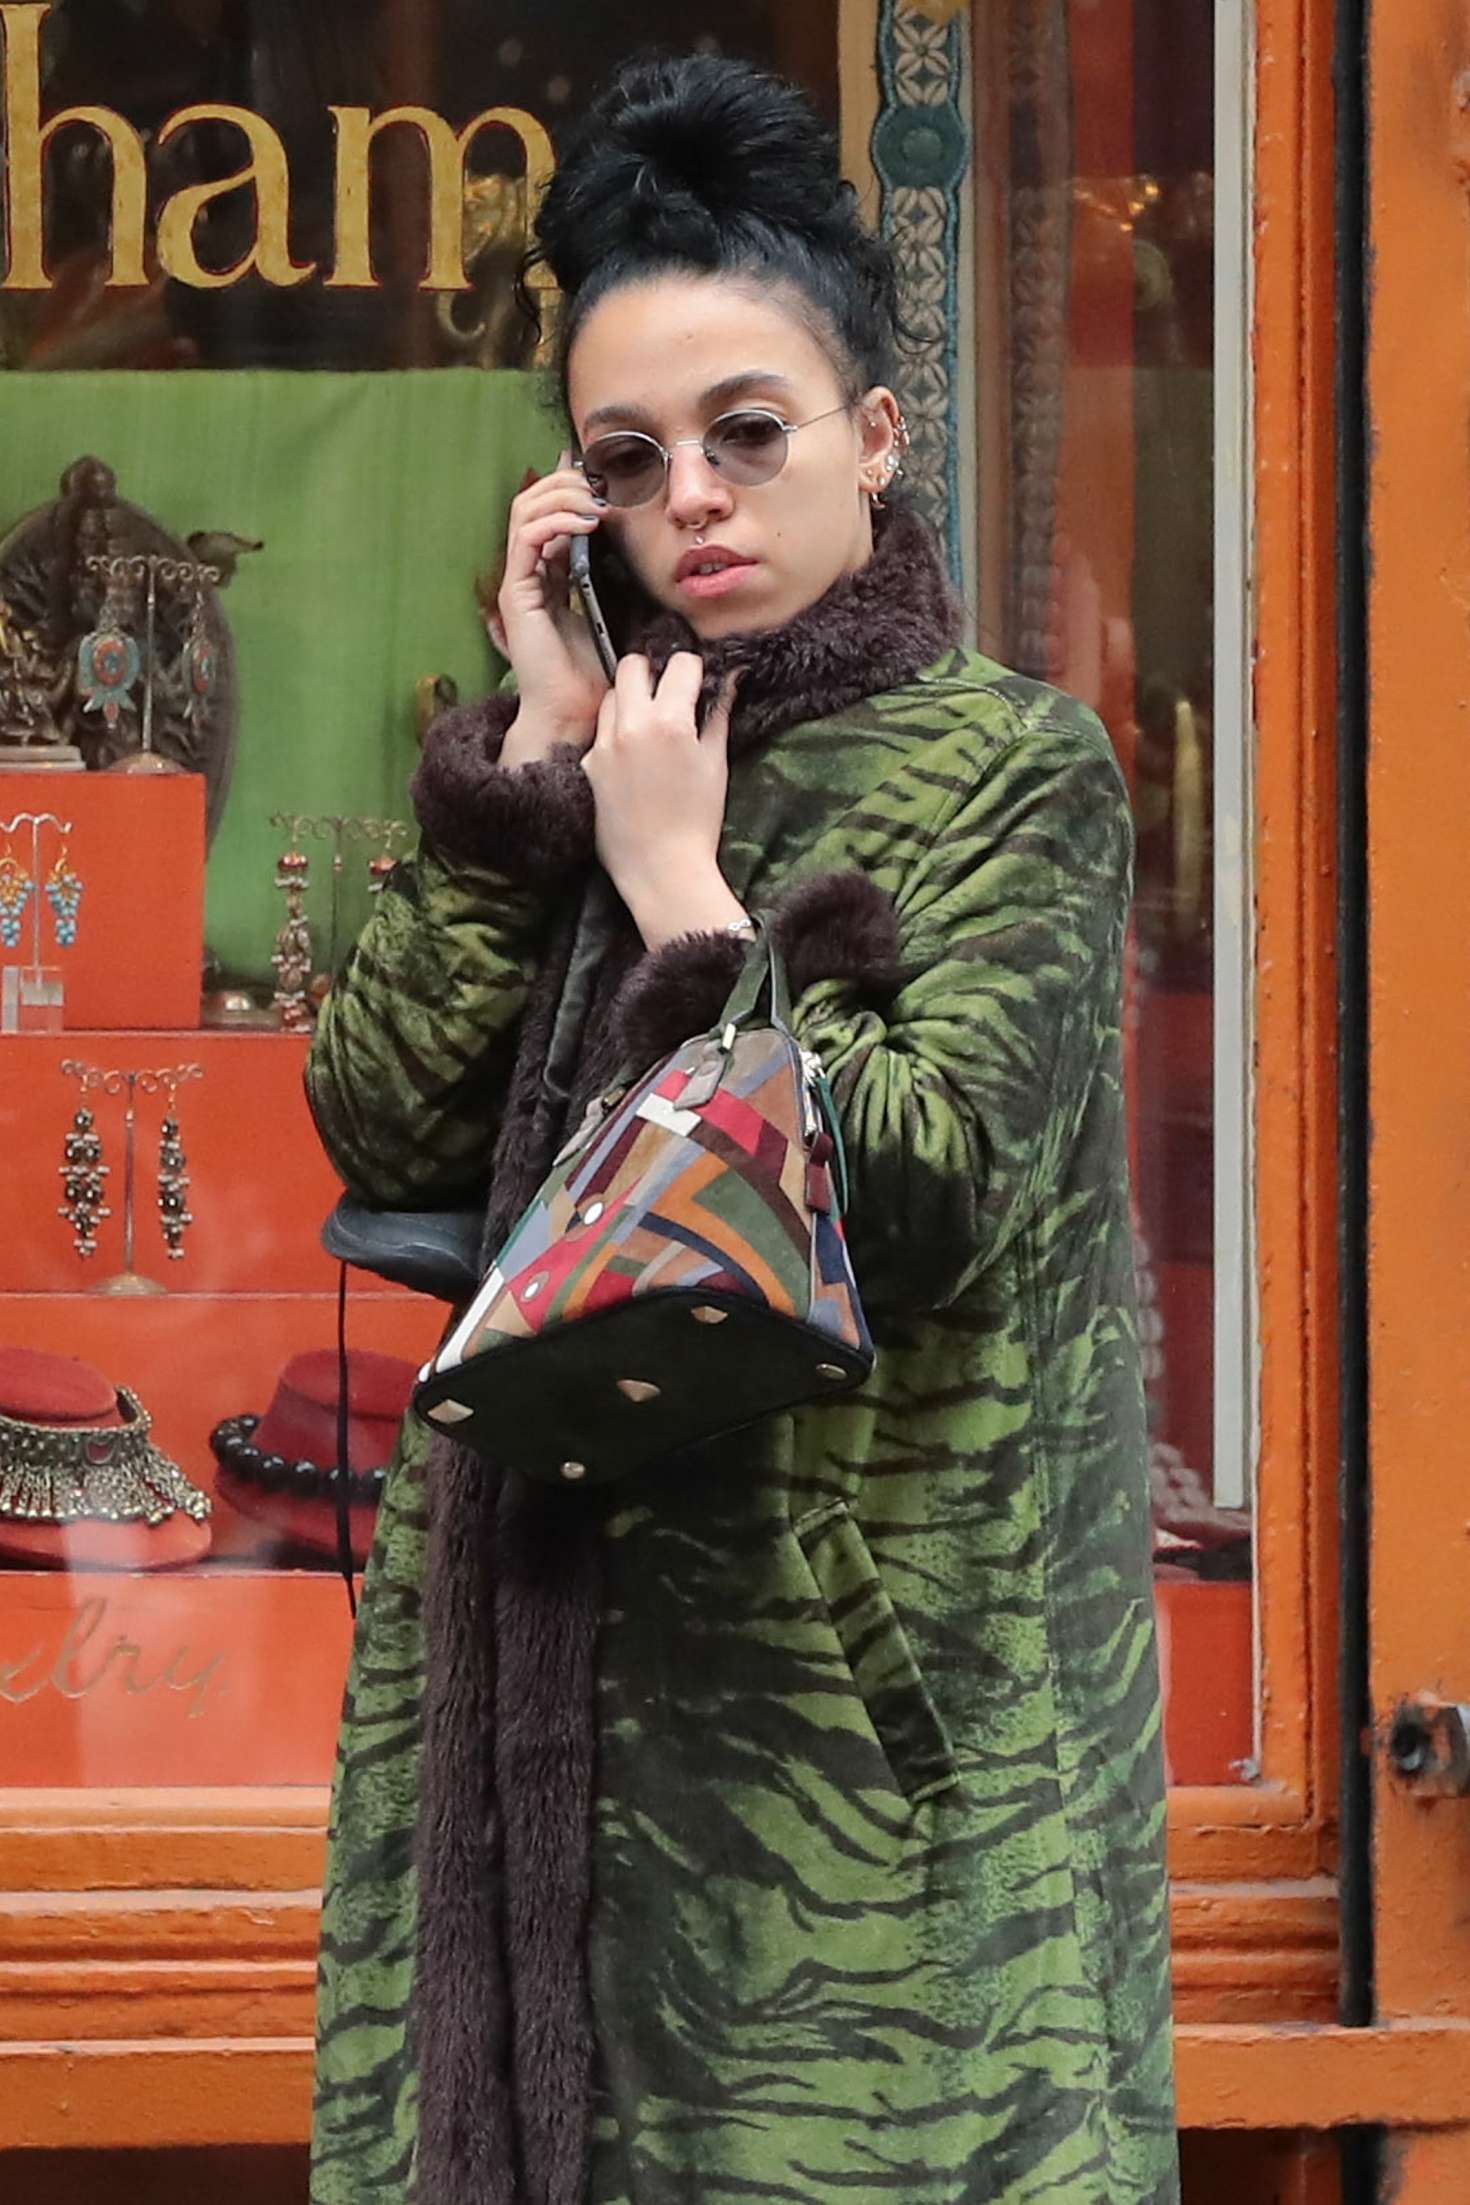 FKA Twigs out shopping in Soho